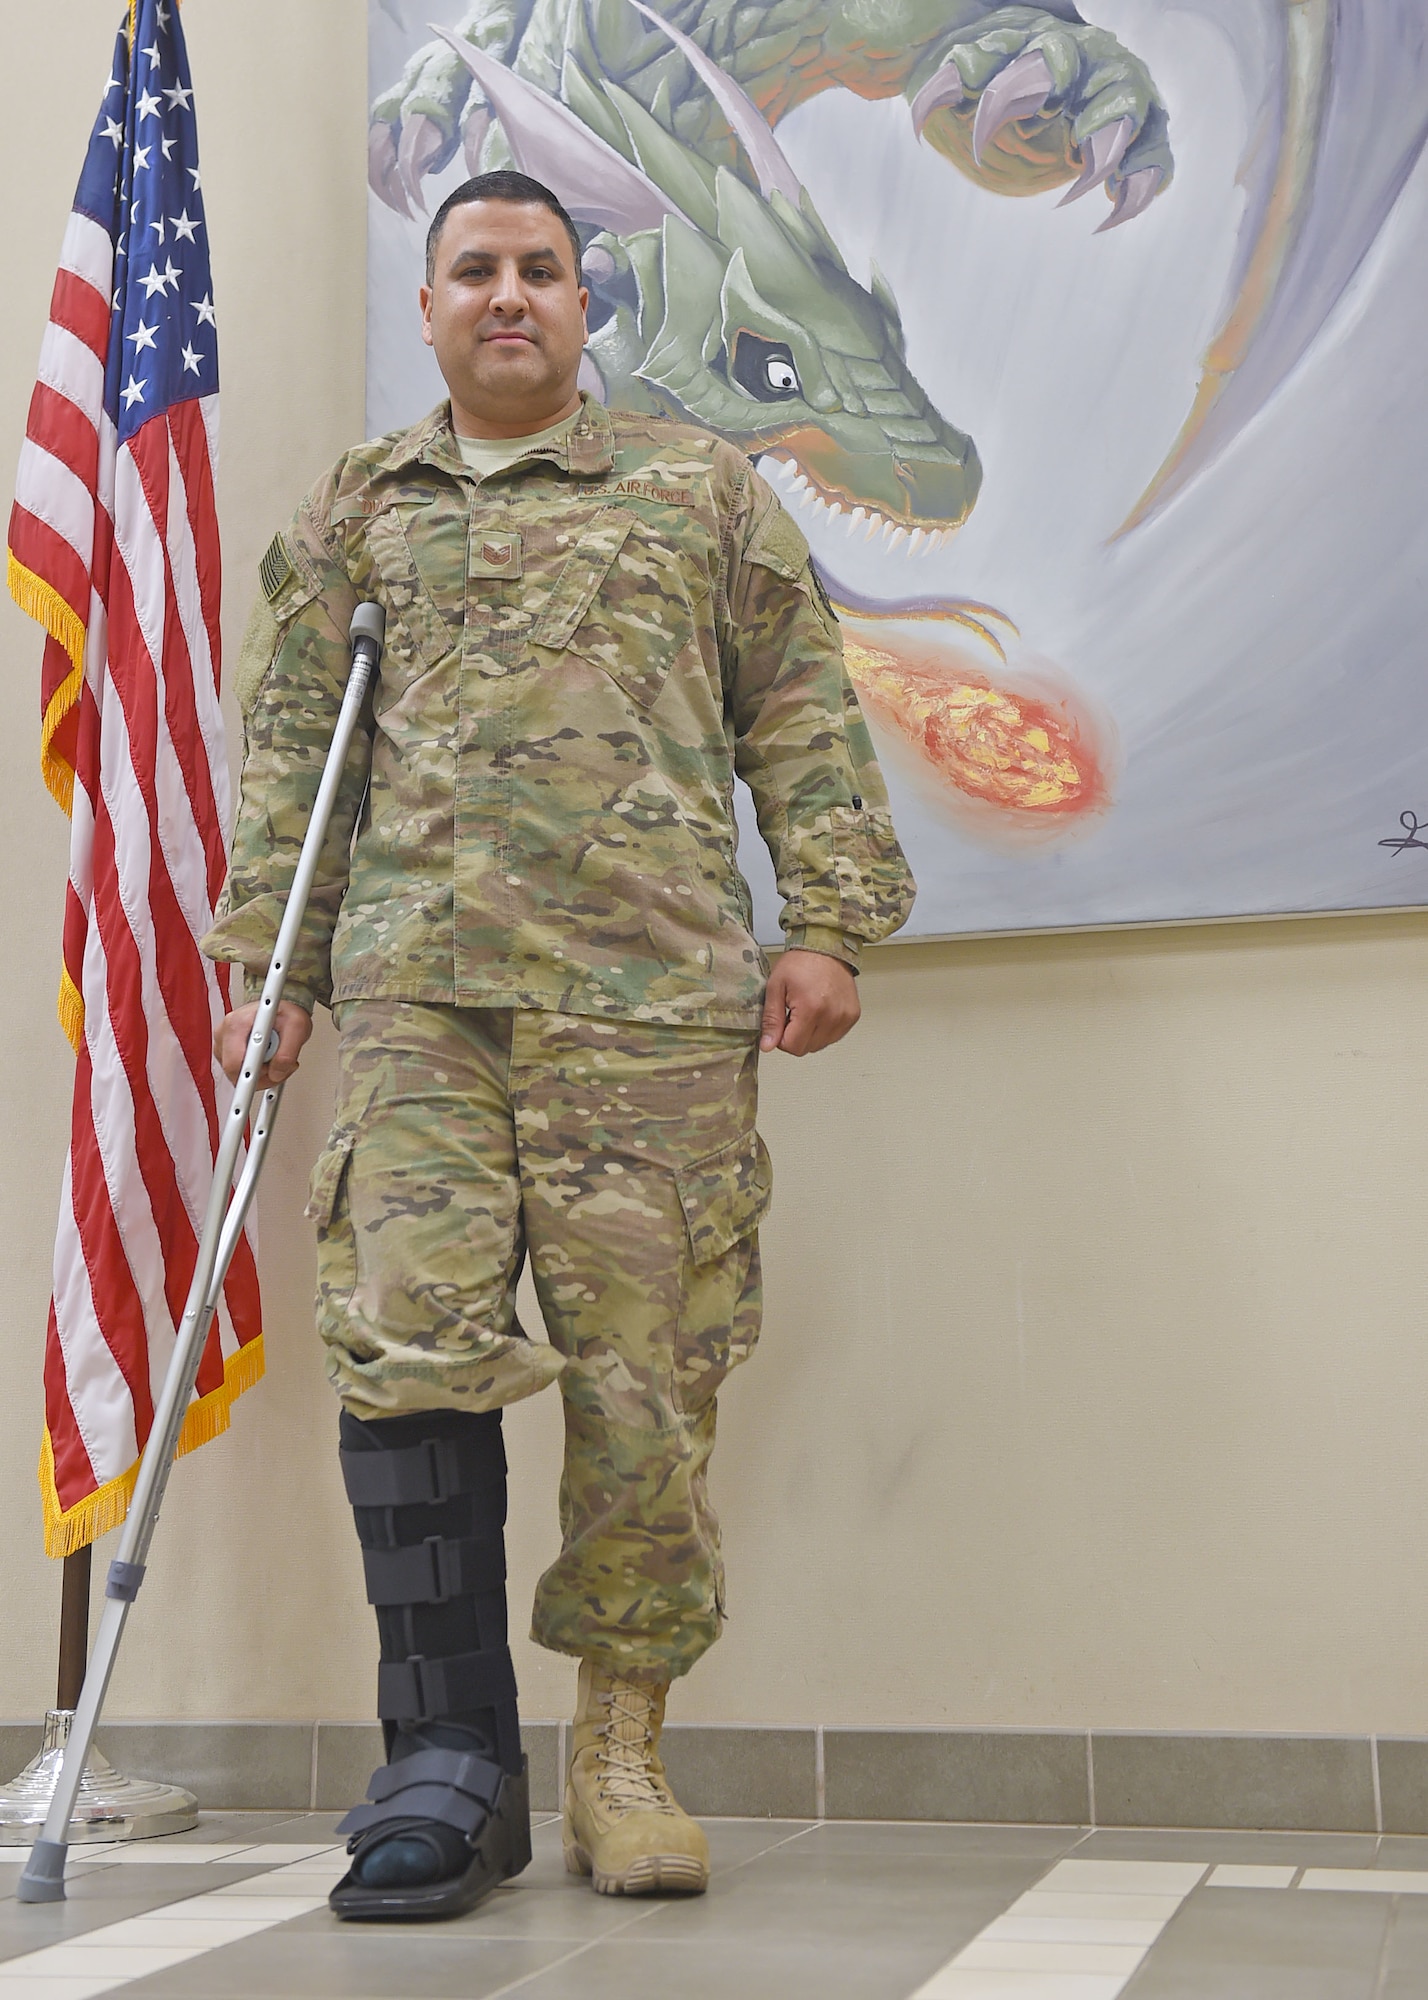 An Airman with a cast on his foot poses for a photo in front of an American flag